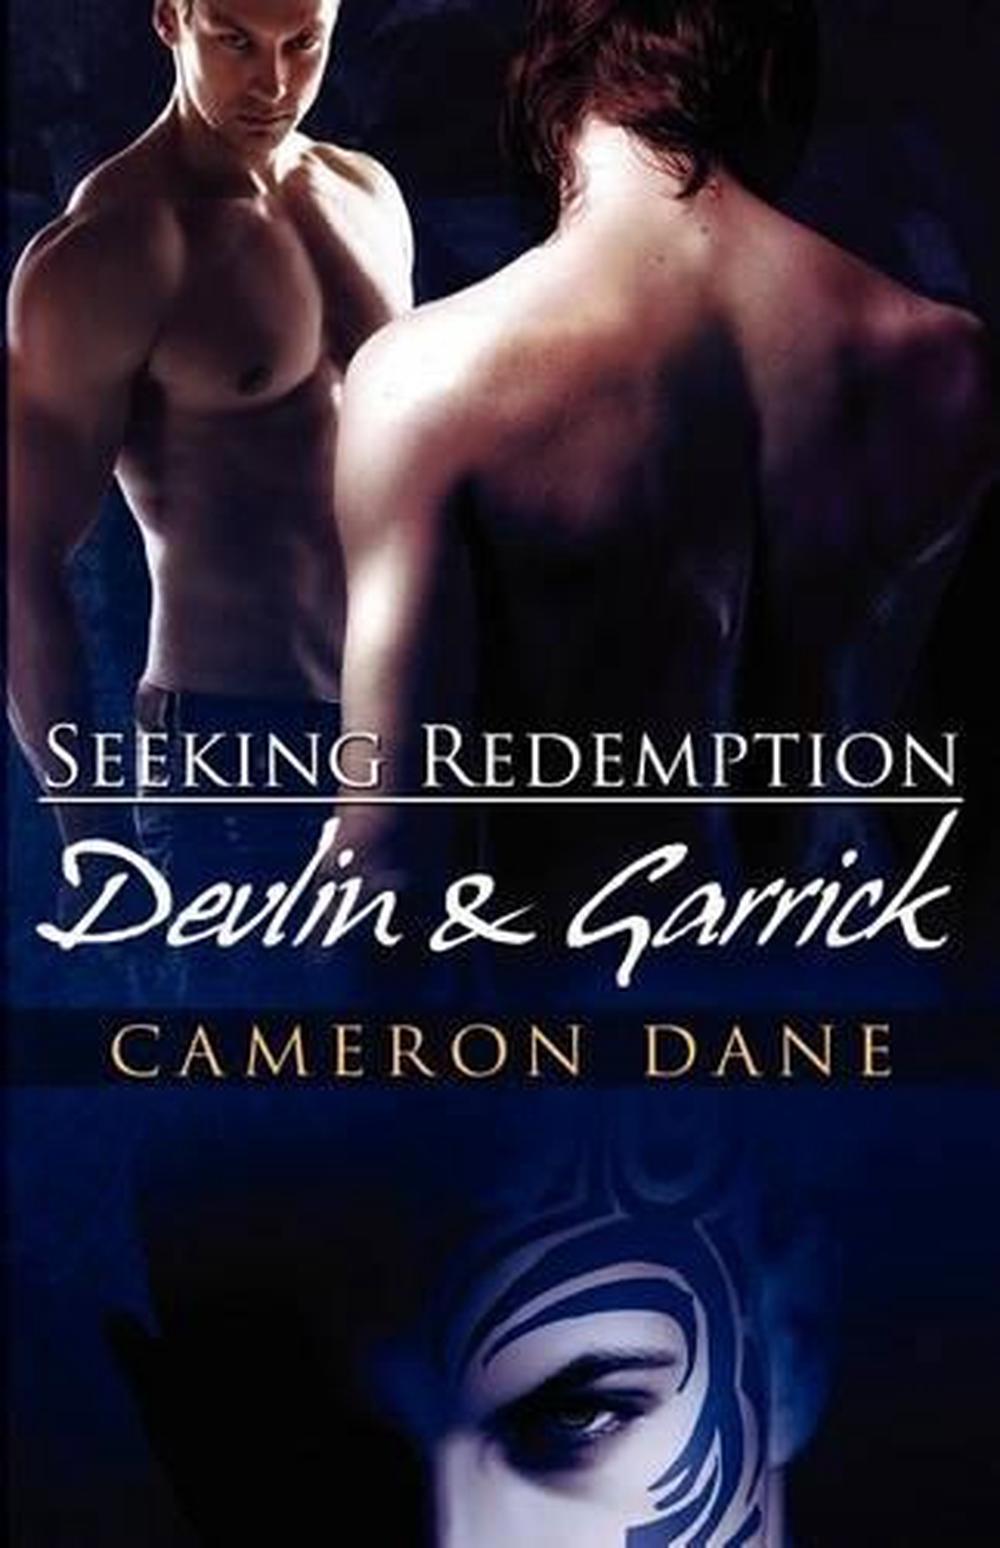 A Fostered Love by Cameron Dane